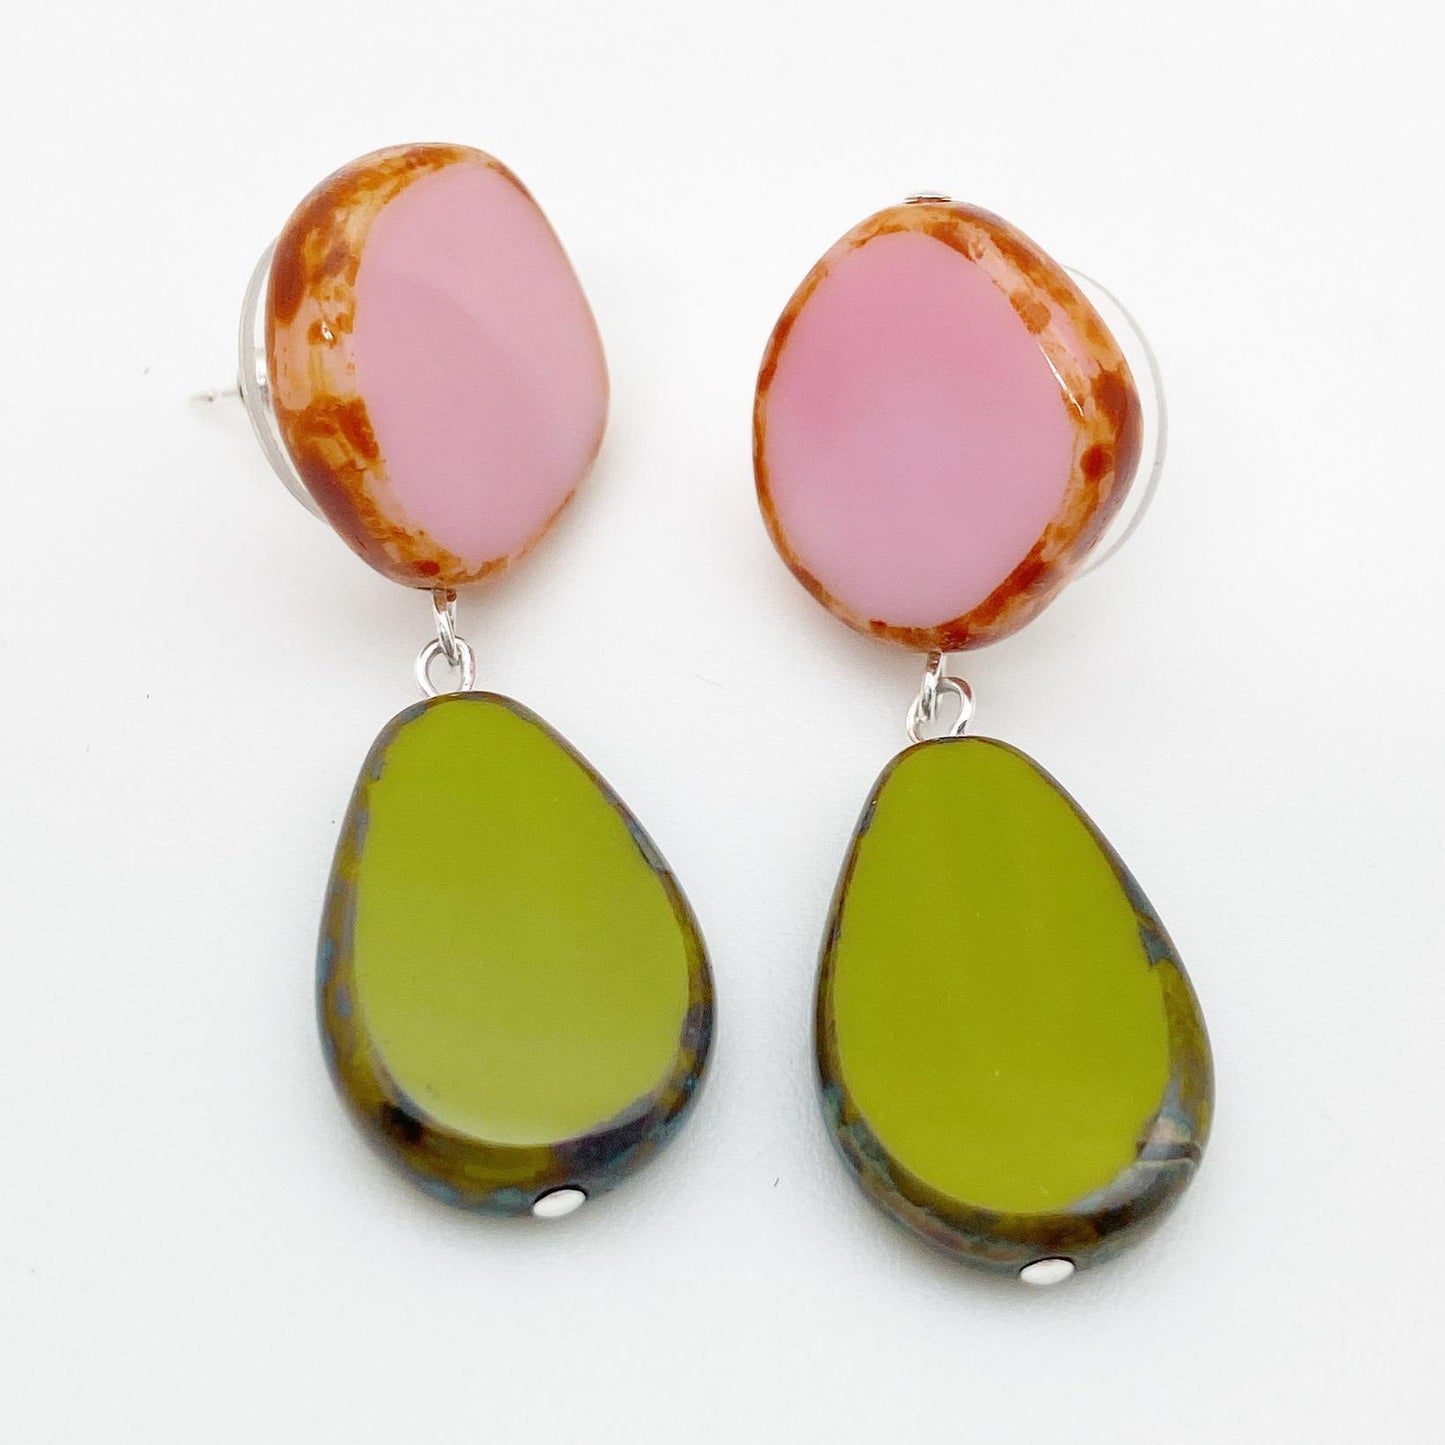 Earrings - Furnace Glass Drops - Pink and Green Posts